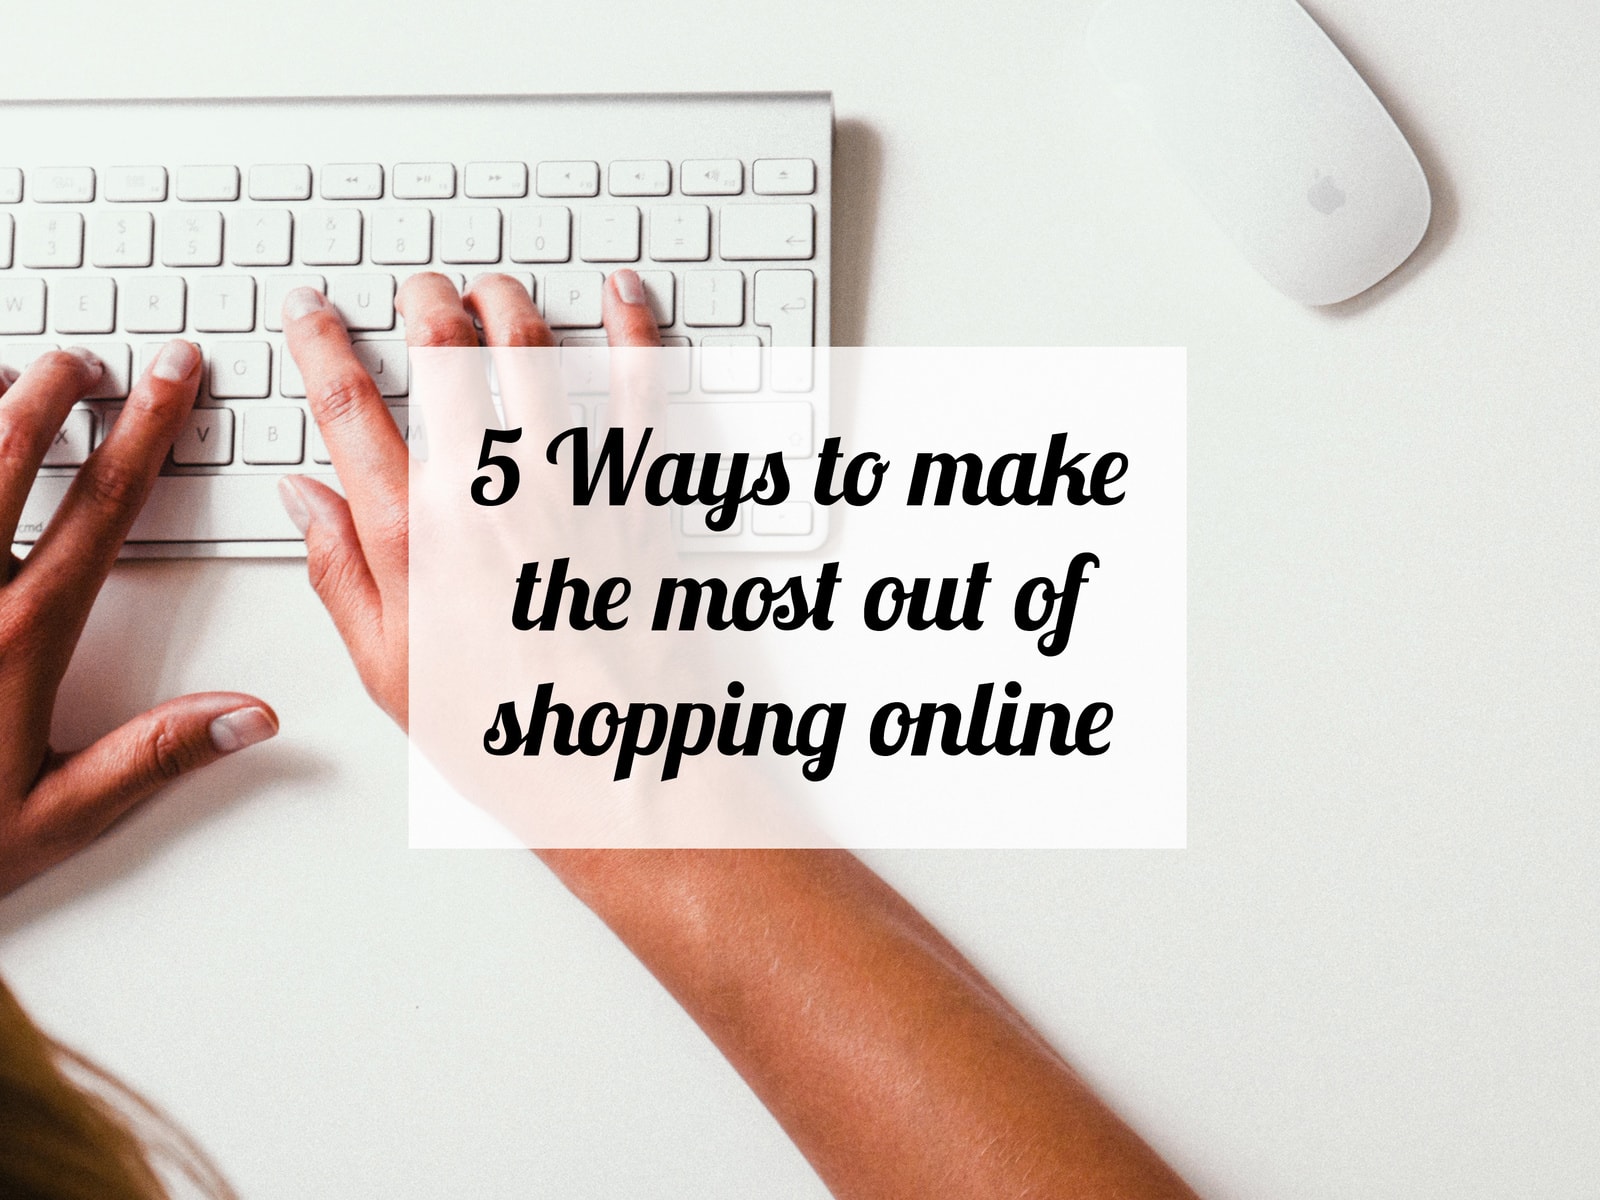 5 Ways to make the most out of shopping online